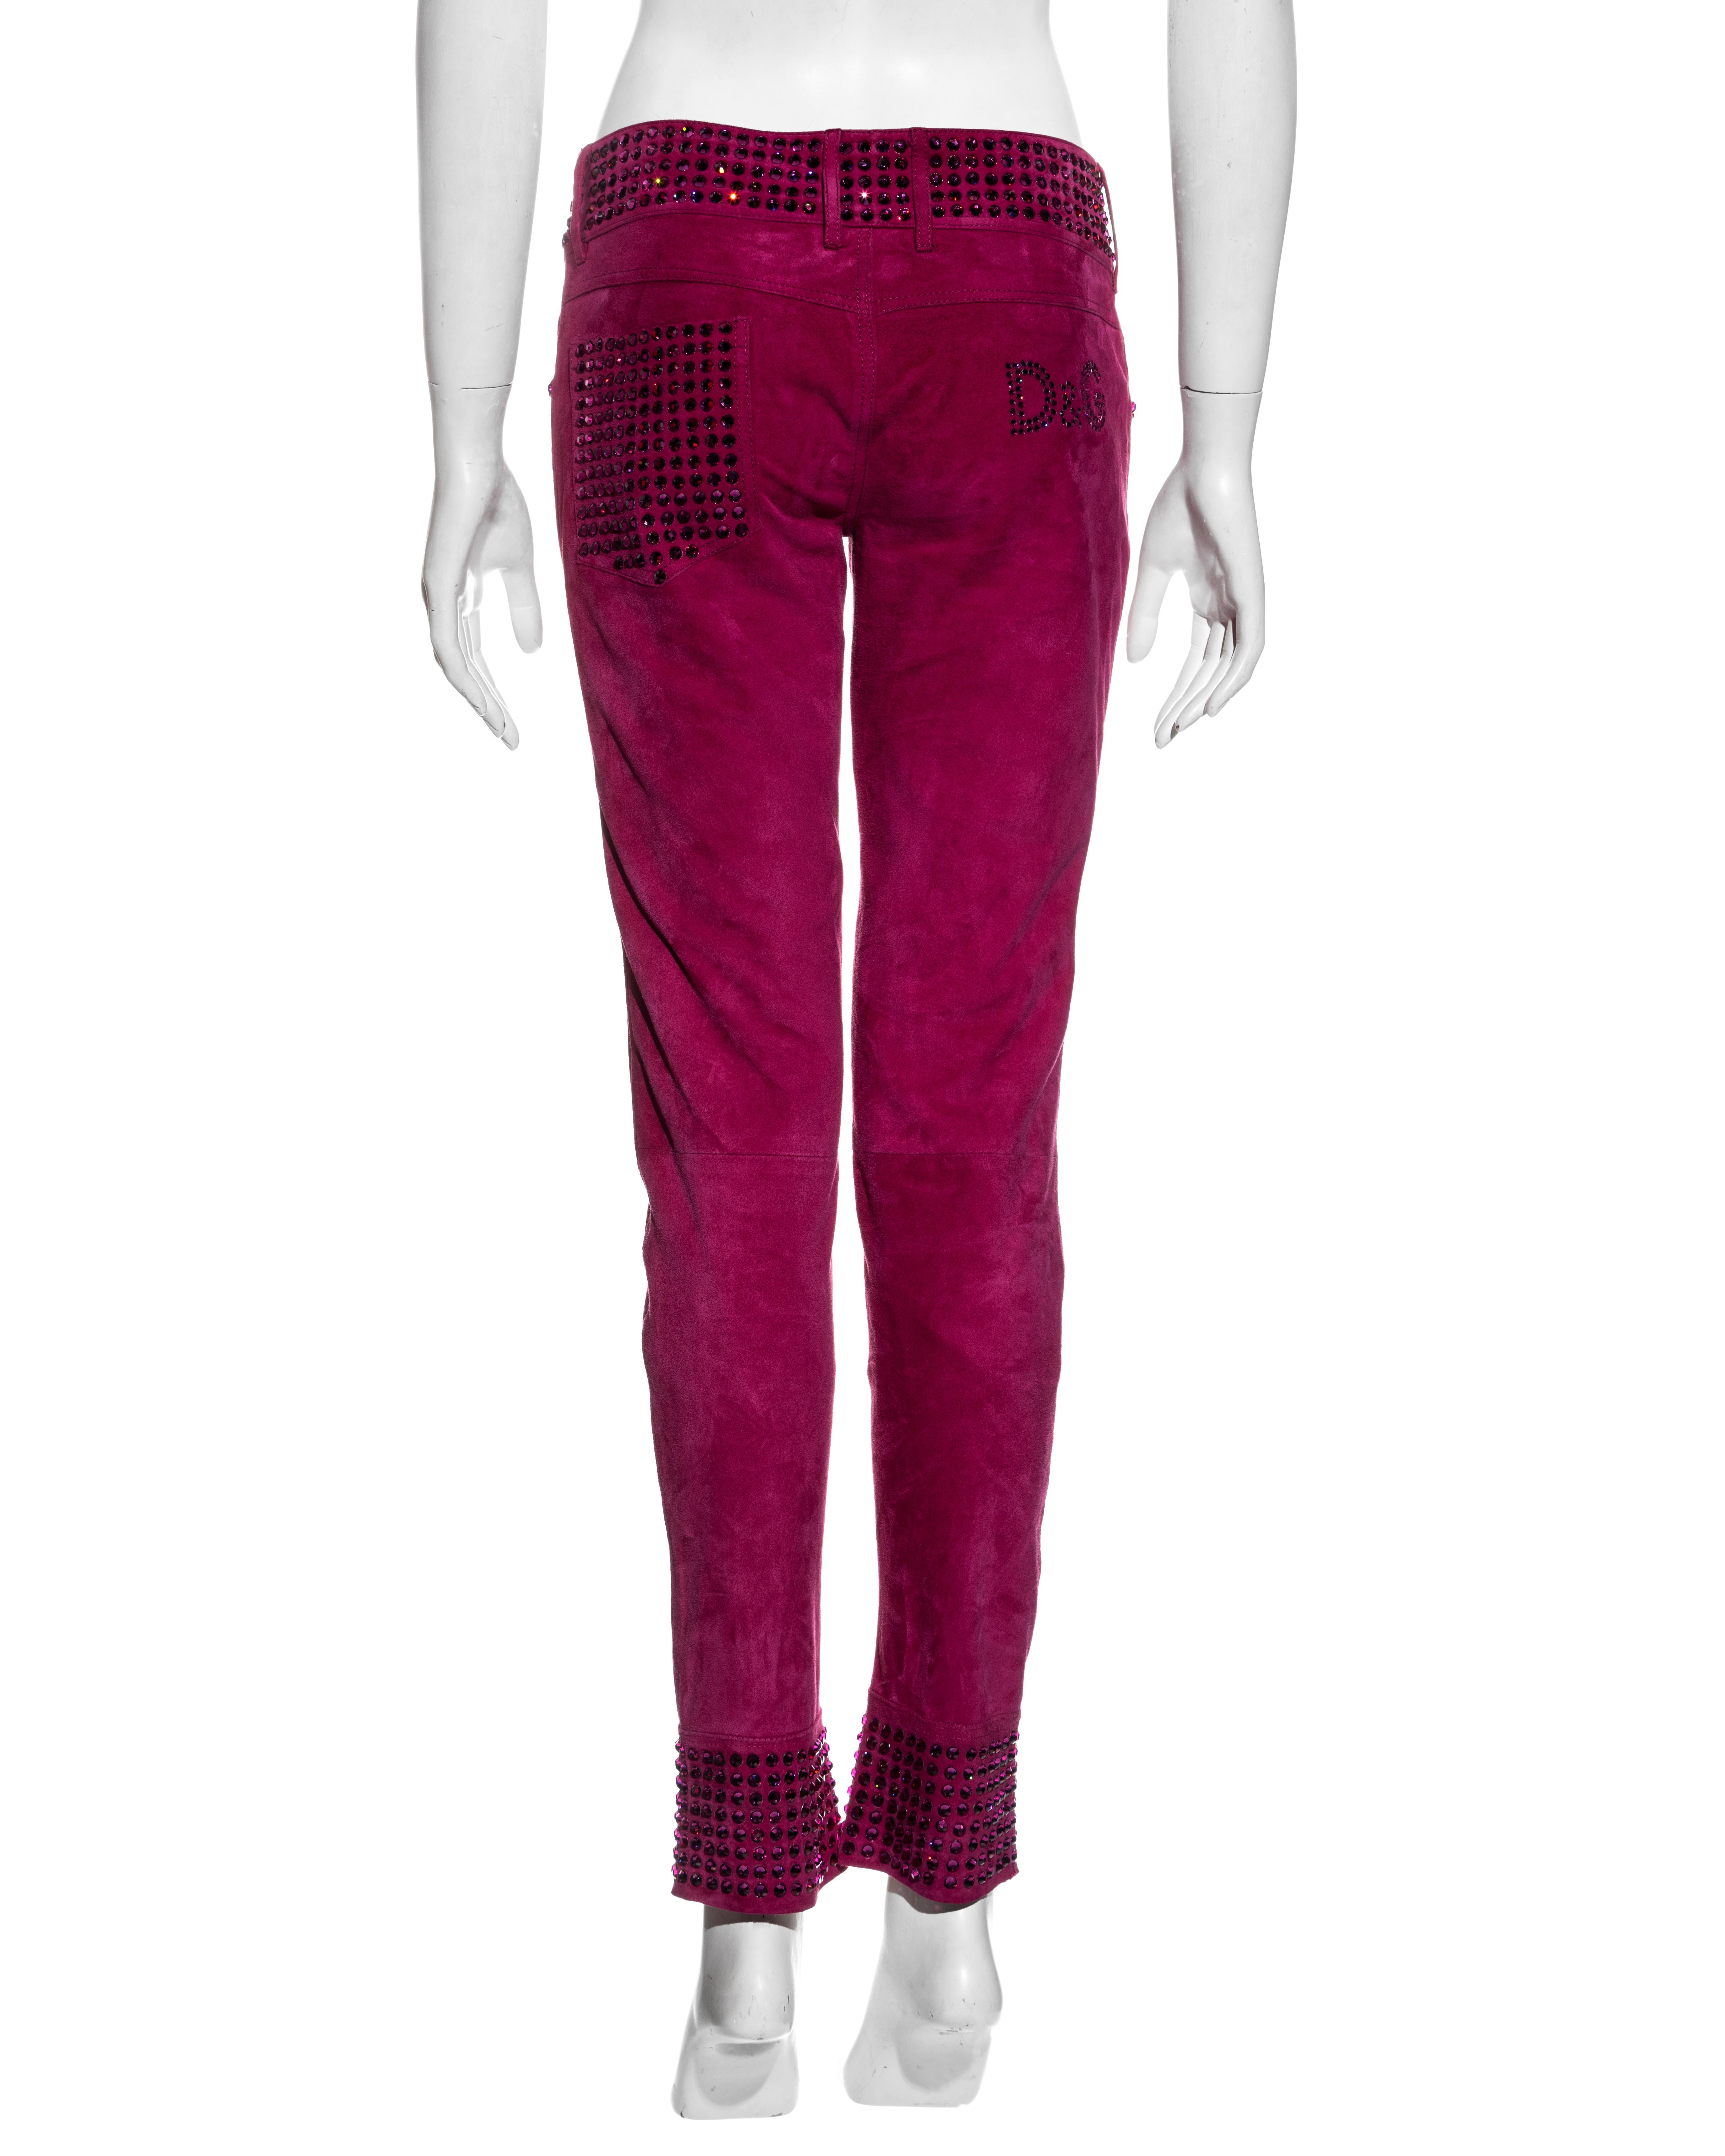 D&G by Dolce & Gabbana pink suede pants with crystals, c. 1998-1999 4